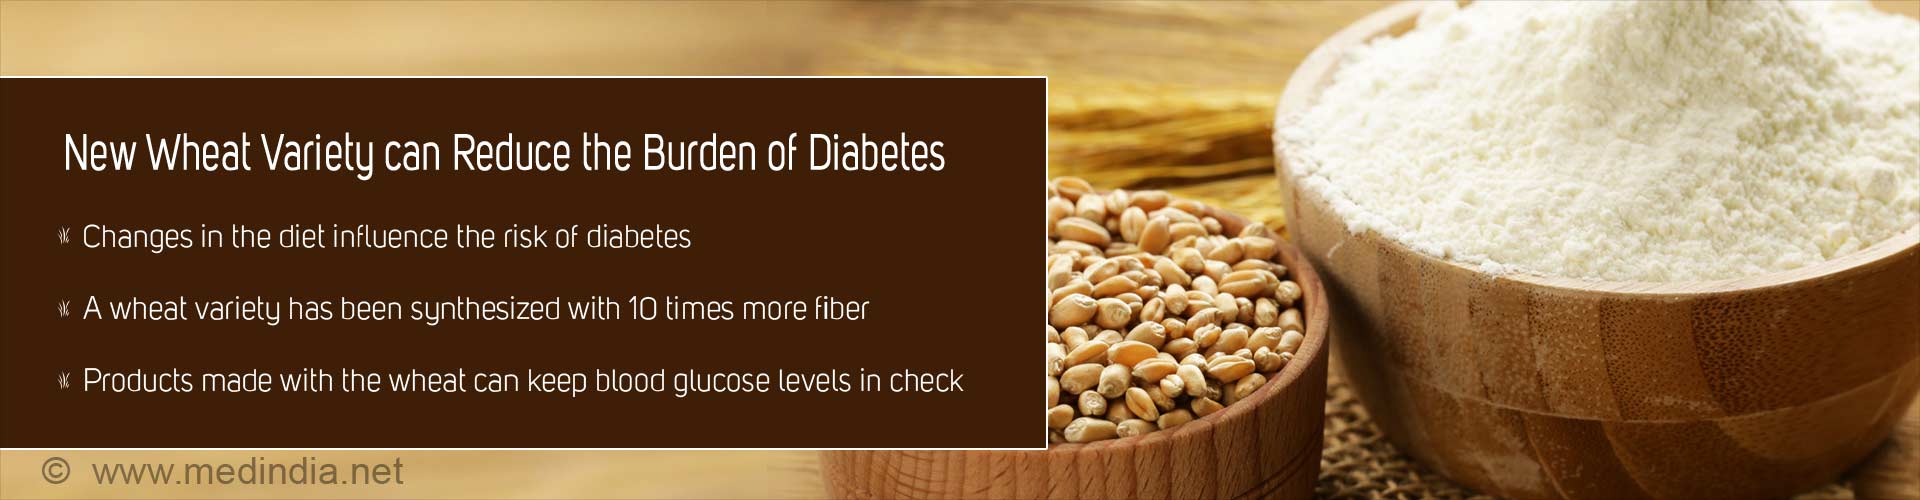 new wheat variety can reduce the burden of diabetes
- changes in the diet influence the rick of diabetes
- a wheat variety has been synthesized with 10 times more fiber
- products made with the wheat can keep blood glucose levels in check